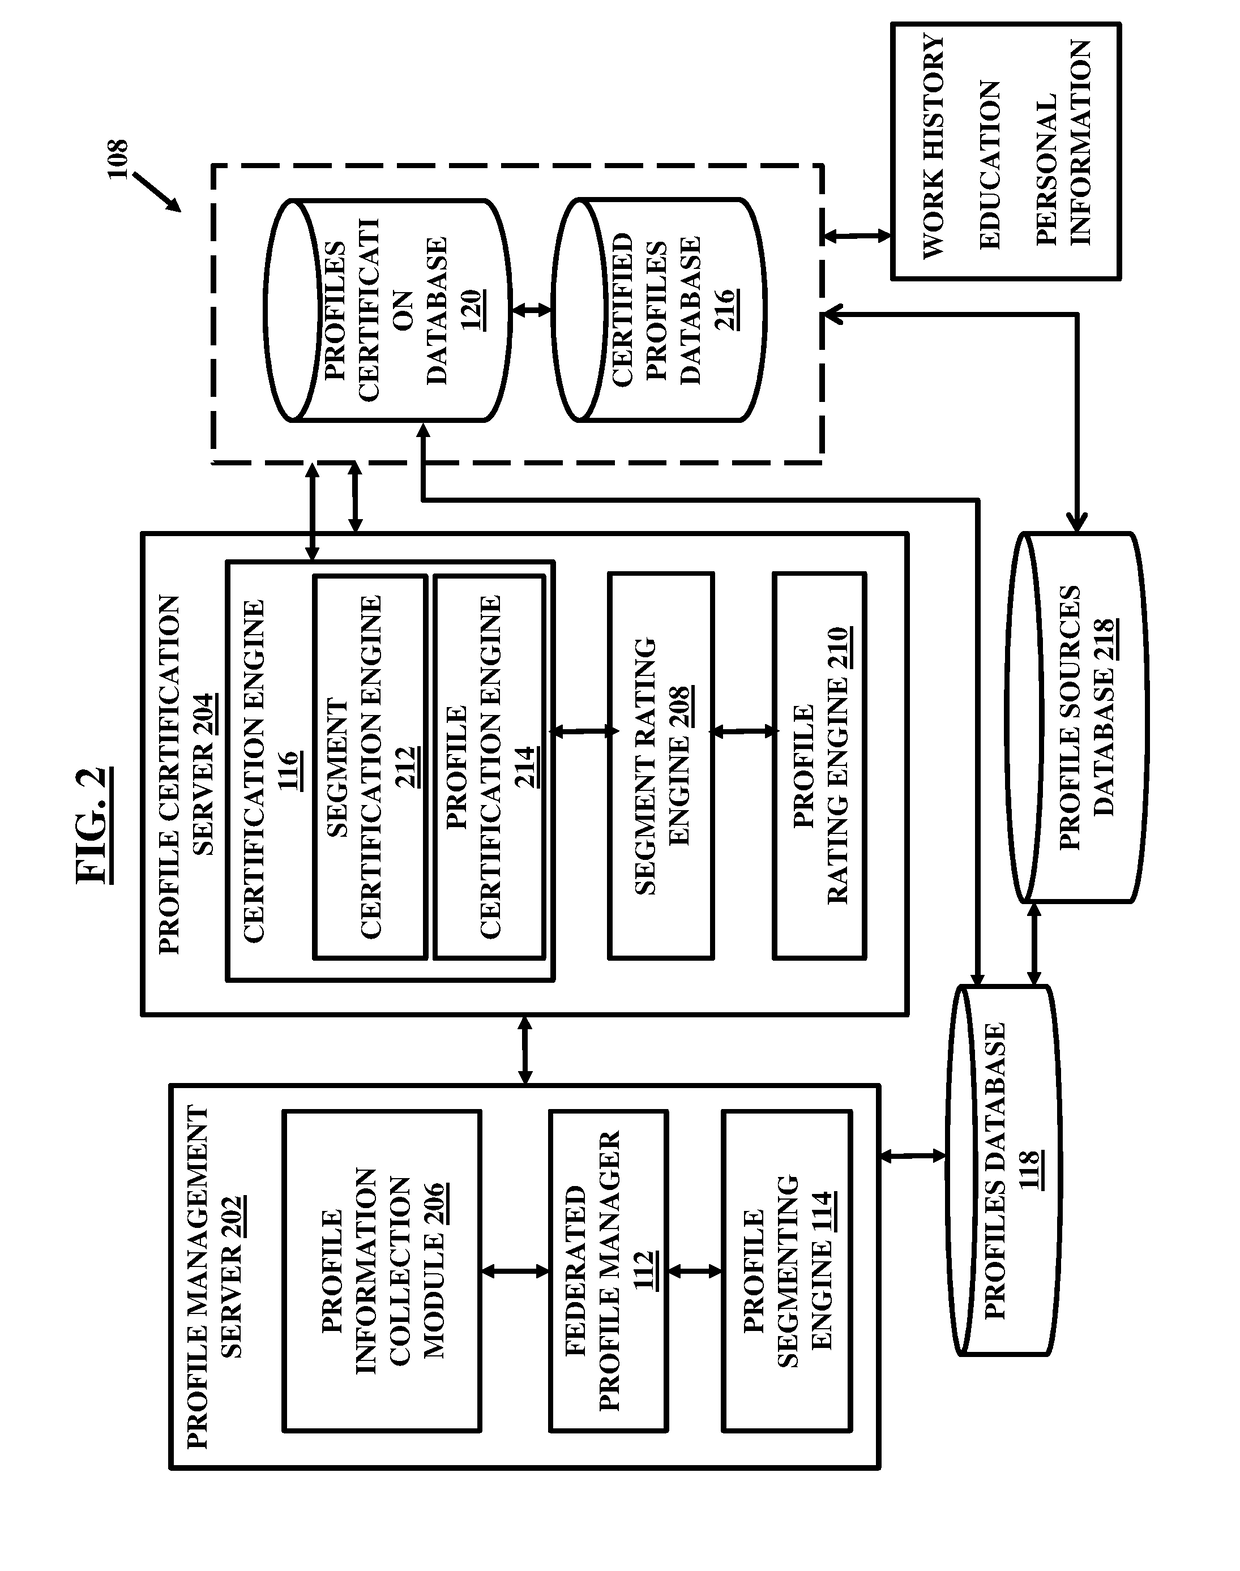 Graphical user interface and smart card reader for facilitating crowdsourced credentialing and accreditation